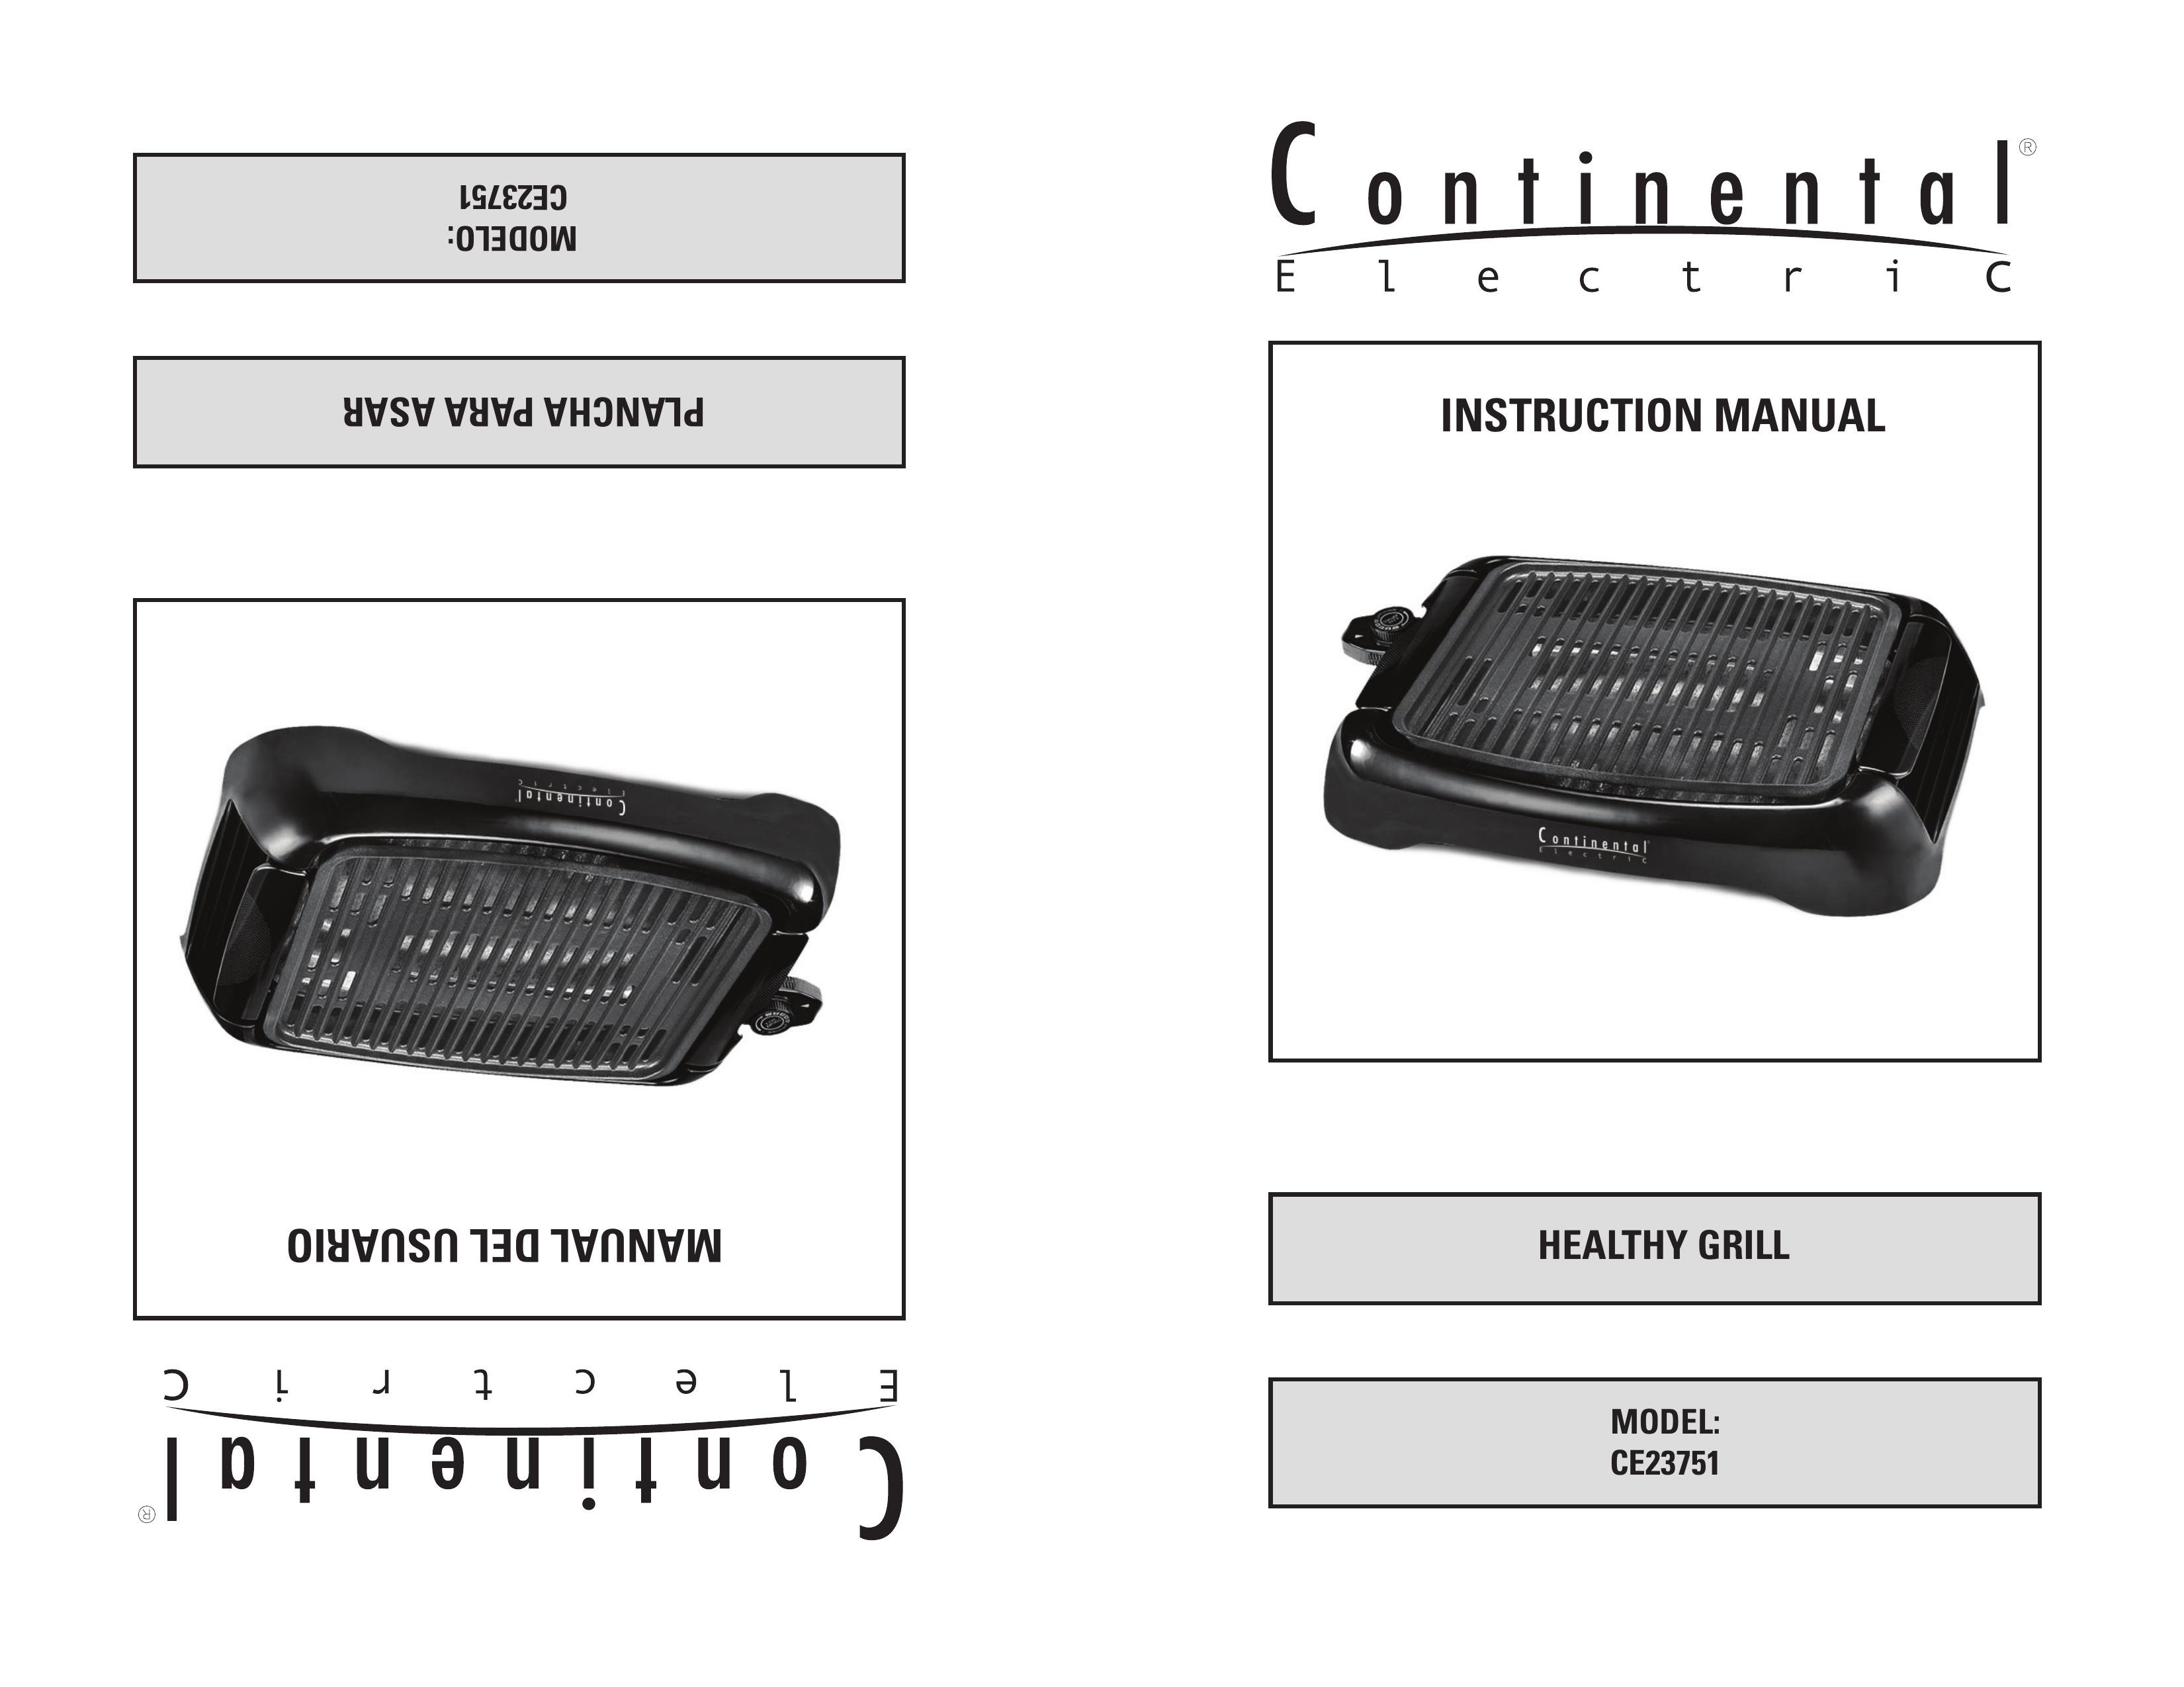 Continental Electric CE23751 Electric Grill User Manual